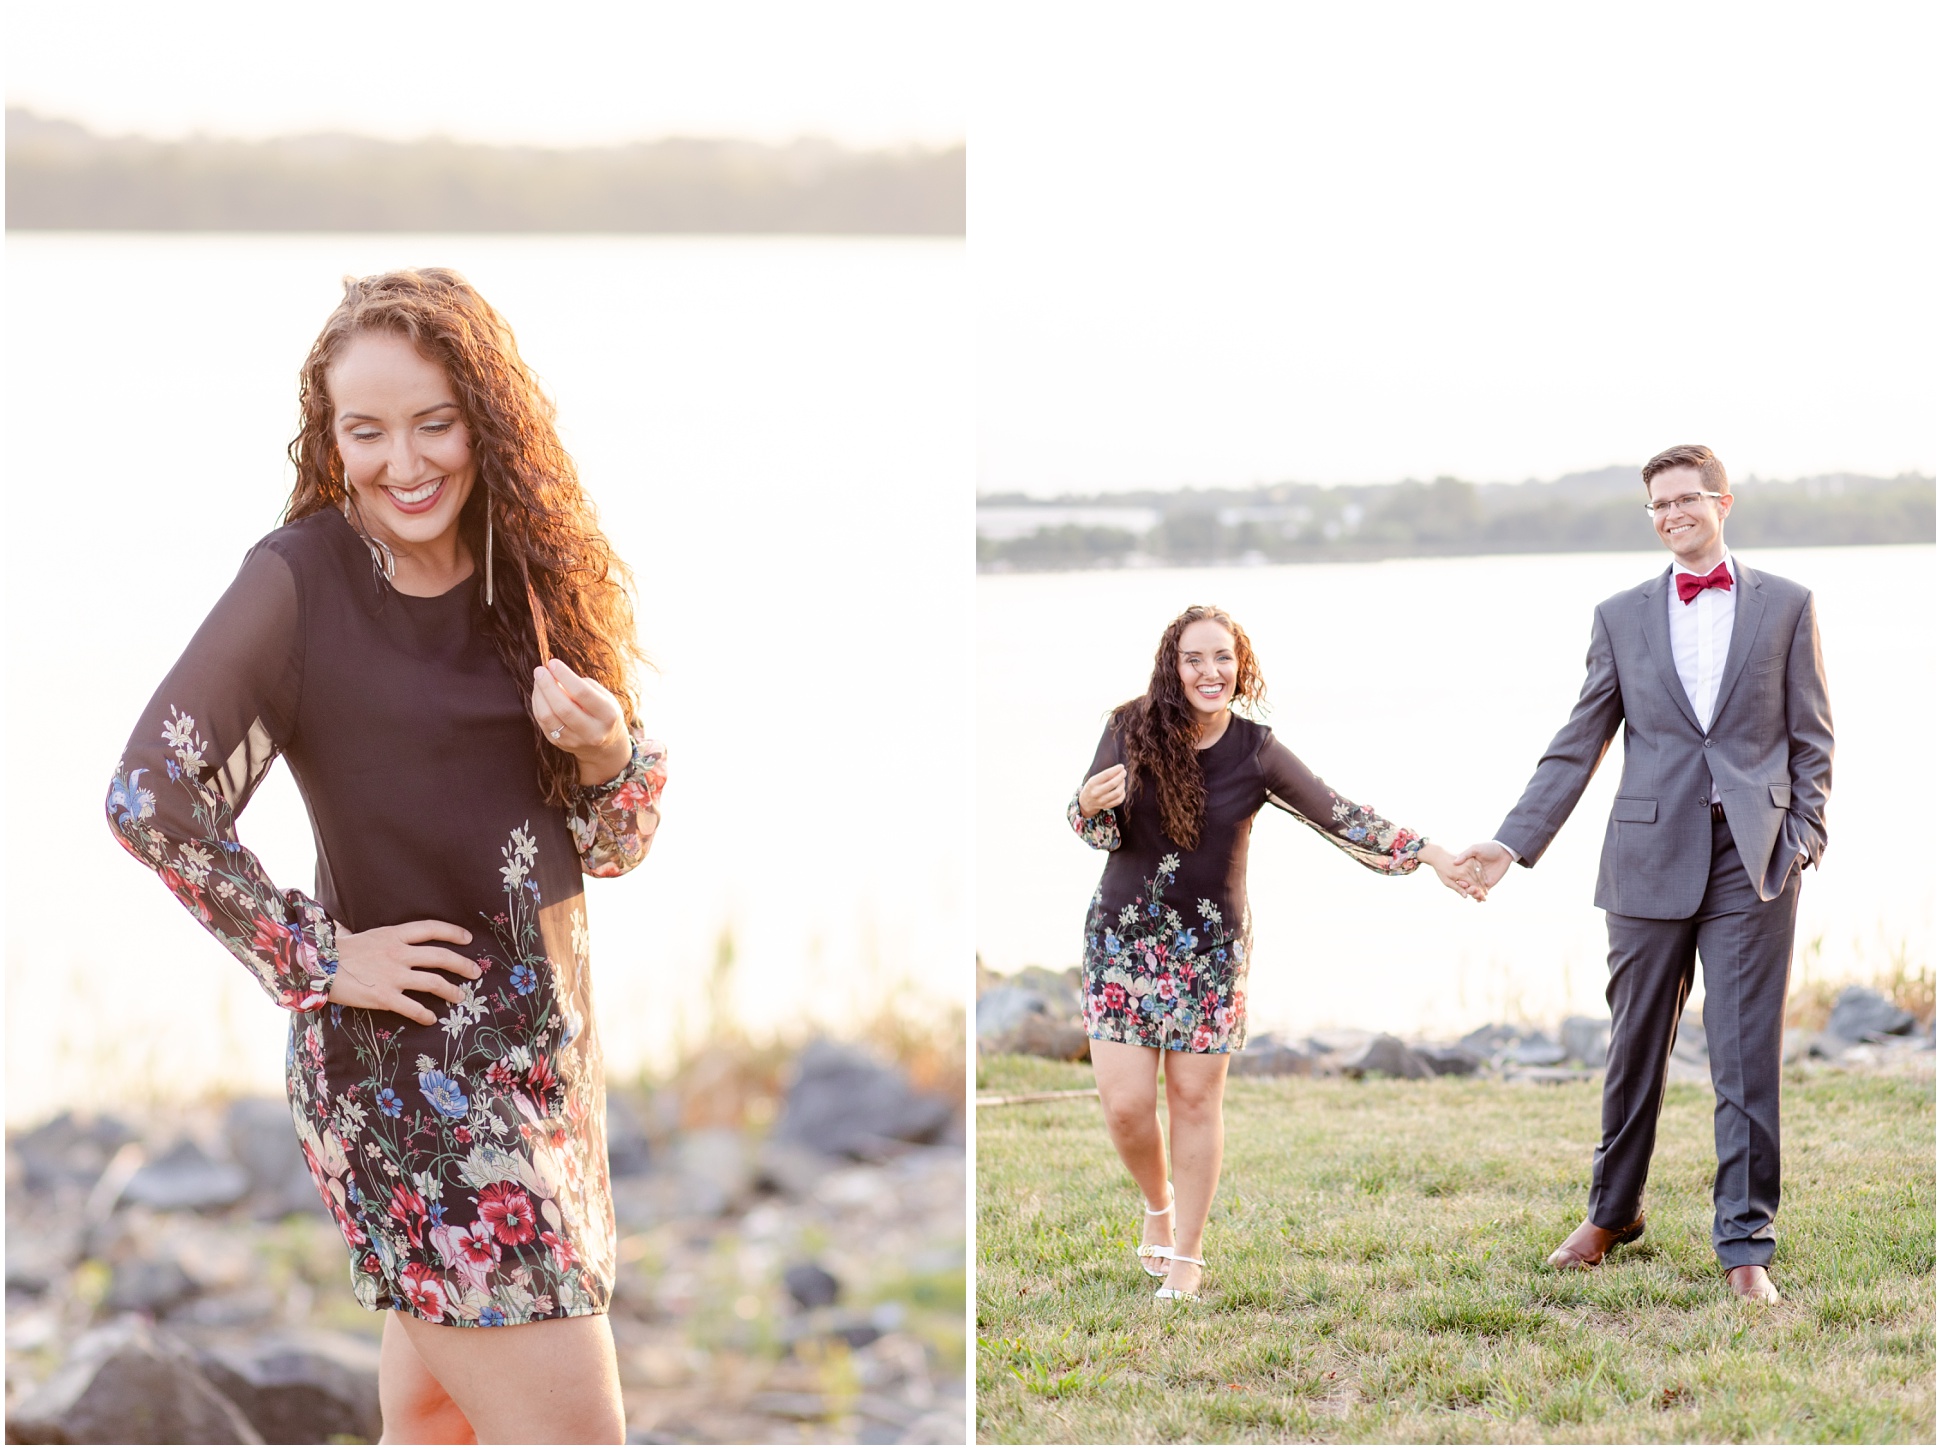 Two images of a couples engagement session at West Covington Park in Baltimore